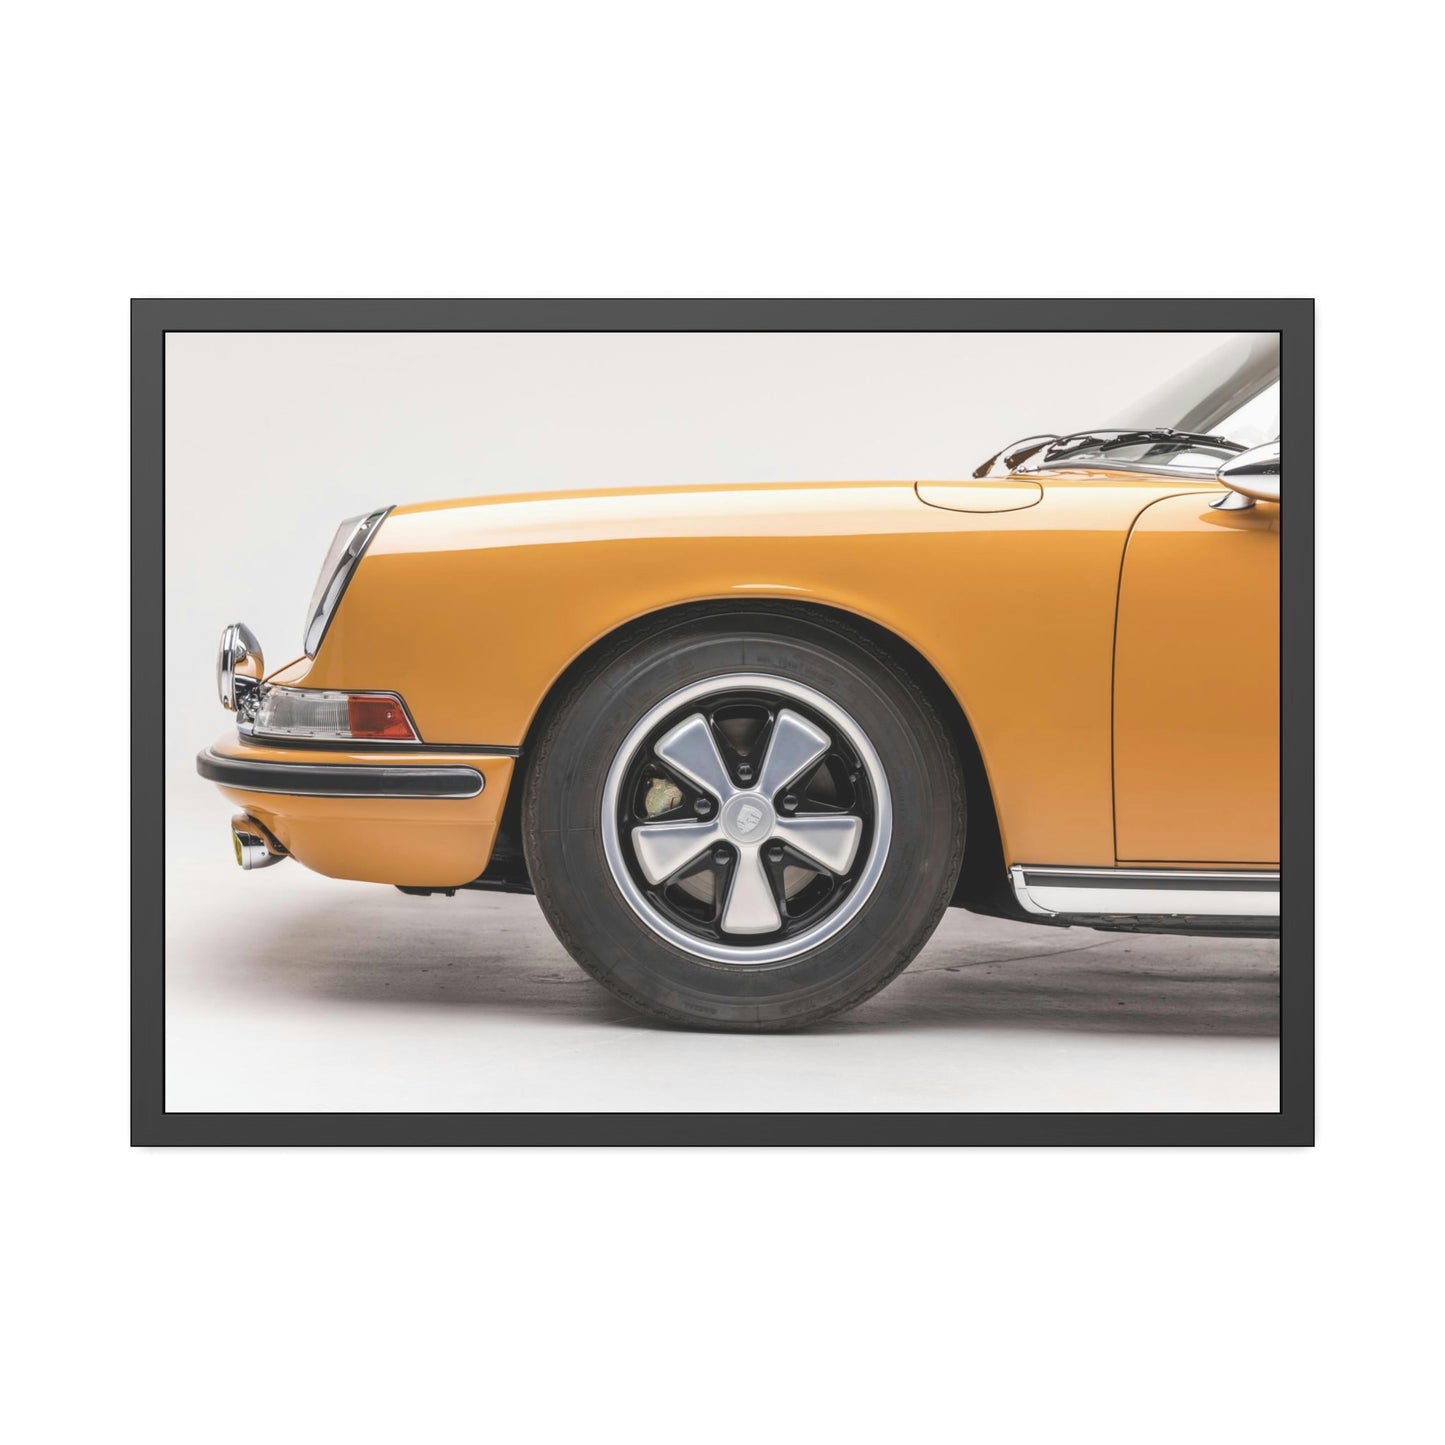 Porsche's Classic Elegance: Framed Poster & Canvas Showcasing the Car's Timeless Style